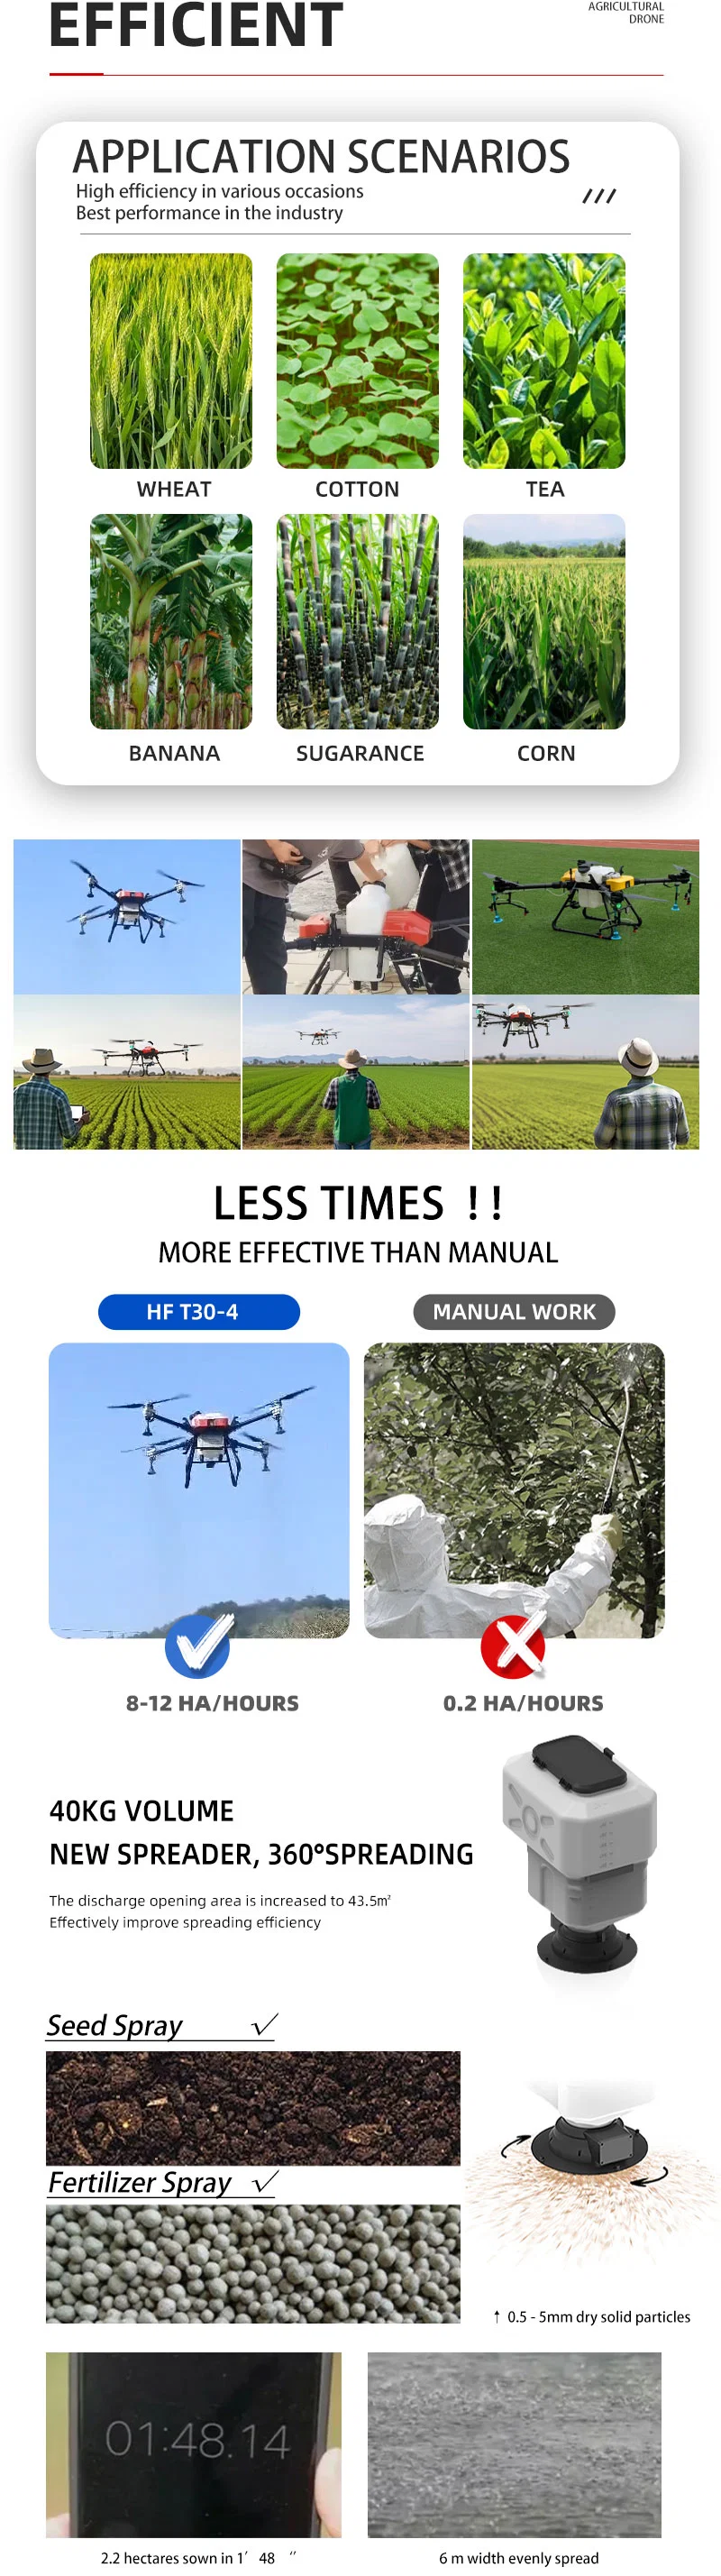 Collapsible GPS Rtk Glonass Atomized Plant Protection Pesticide Spraying Mosquito Pest Control Autonomous Agricultural Pesticide Spraying Uav with Fpv Camera